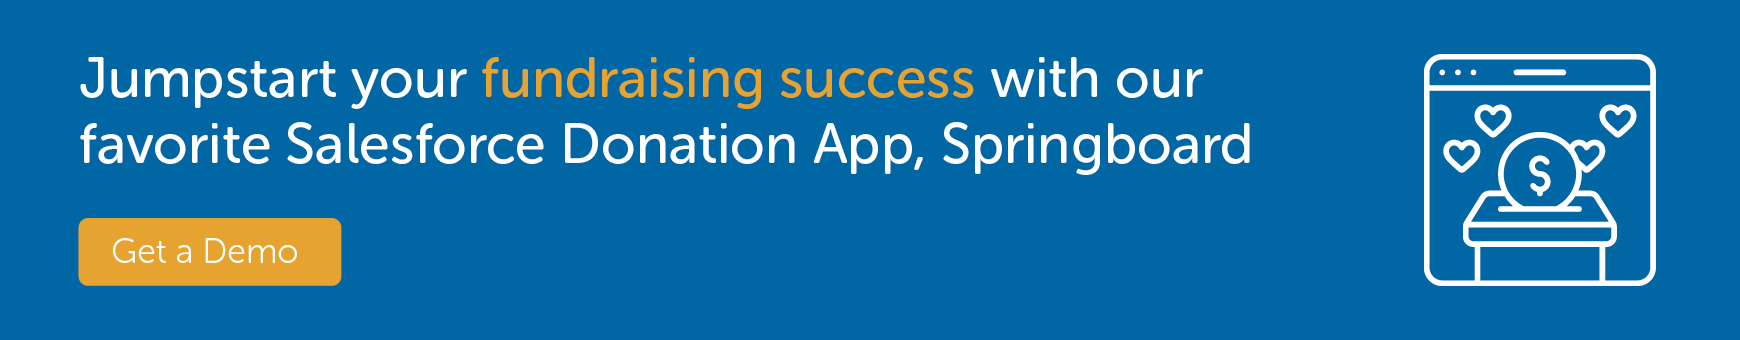 Springboard by Jackson River is the best salesforce donation app to deepen your organization’s impact and bring in more revenue to power your operations. 